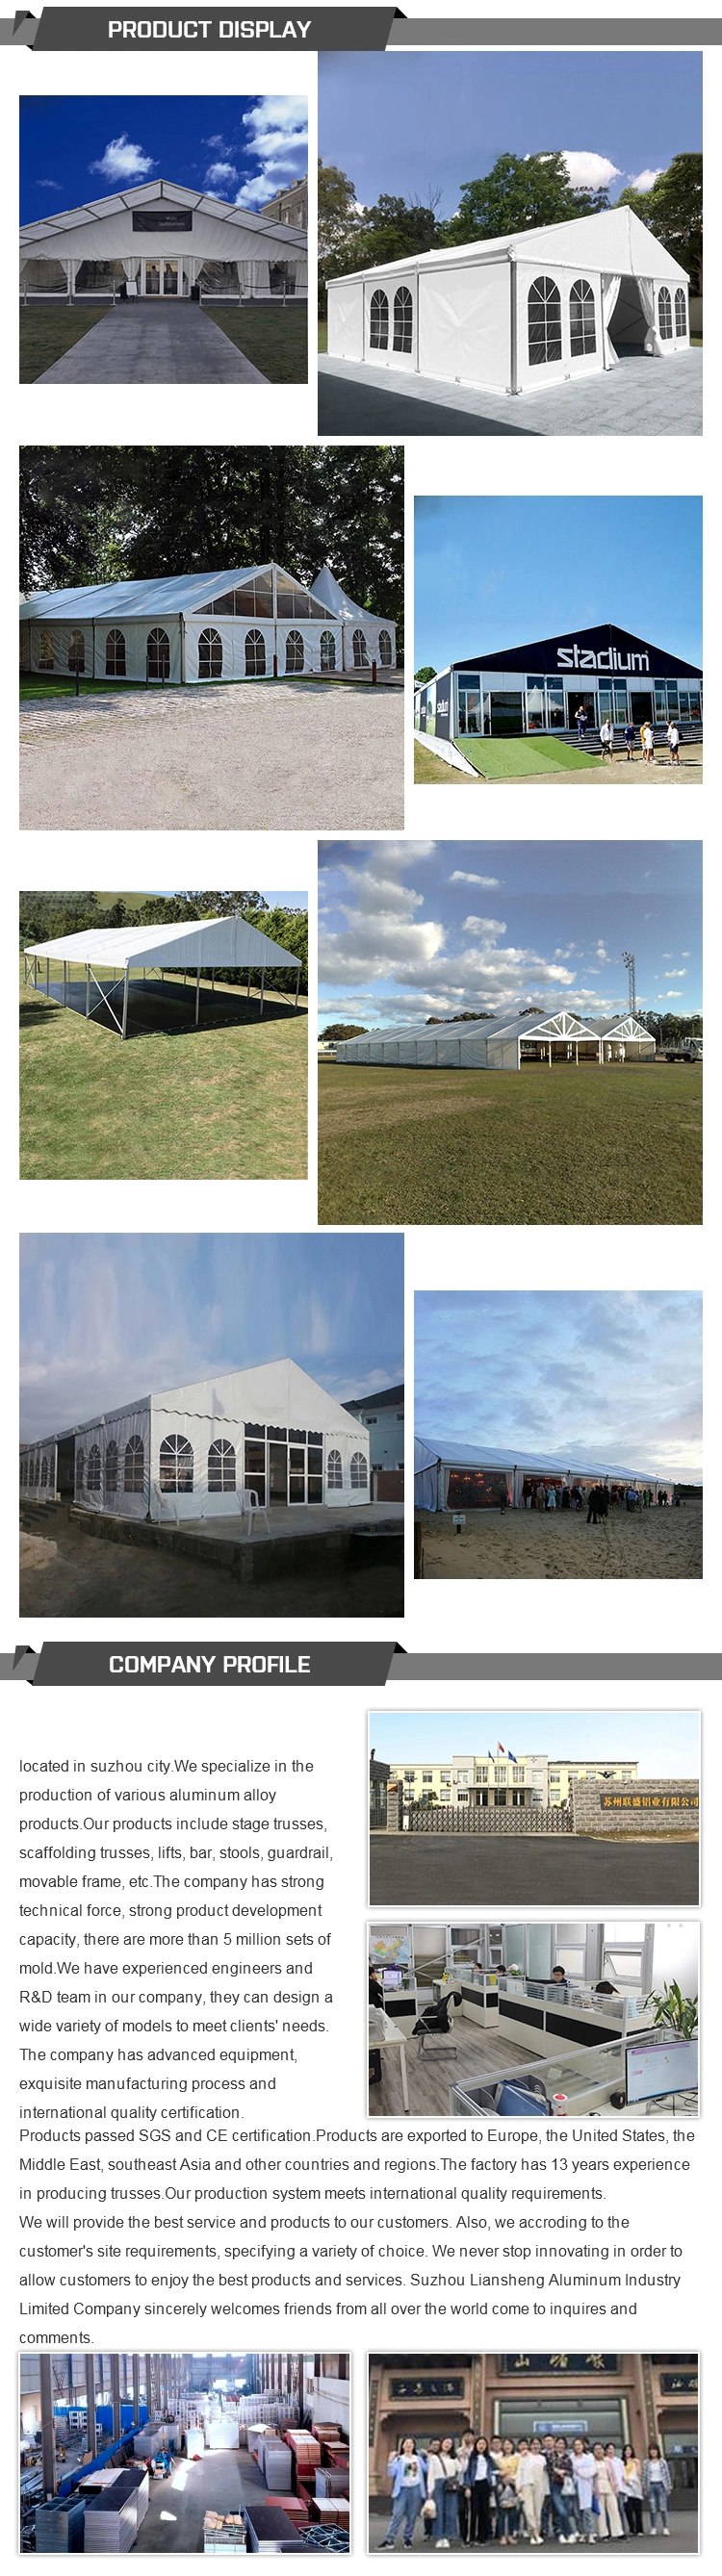 Party Tents Specification Is 5 * 12m Material PE / PVC Wedding Activity Tent Church Catering Festival Exhibition Banquet Tent Wholesale